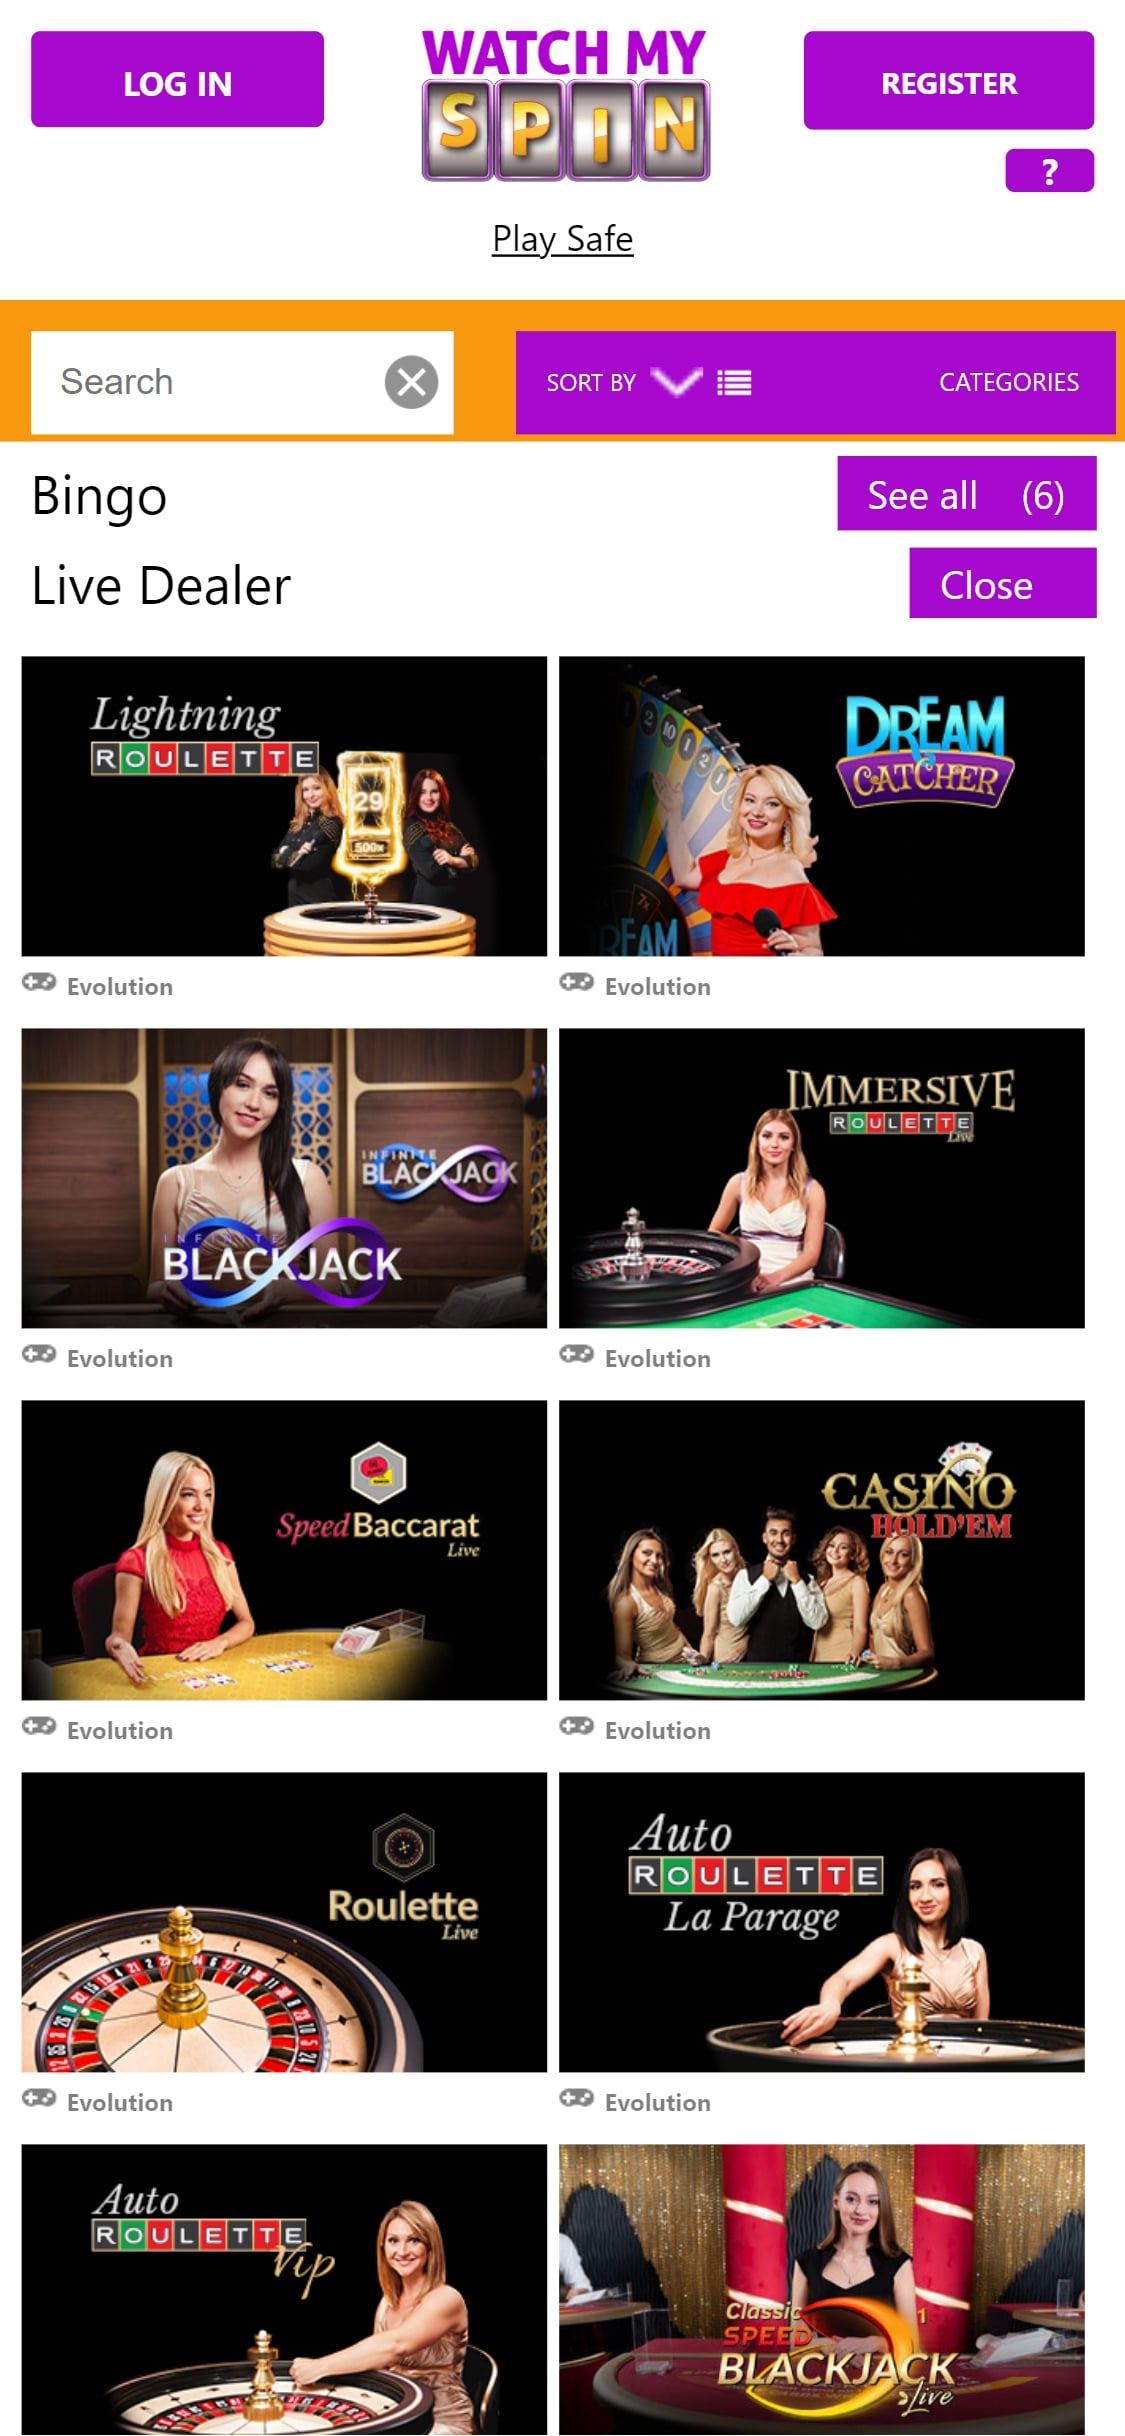 WatchMySpin Casino Mobile Live Dealer Games Review